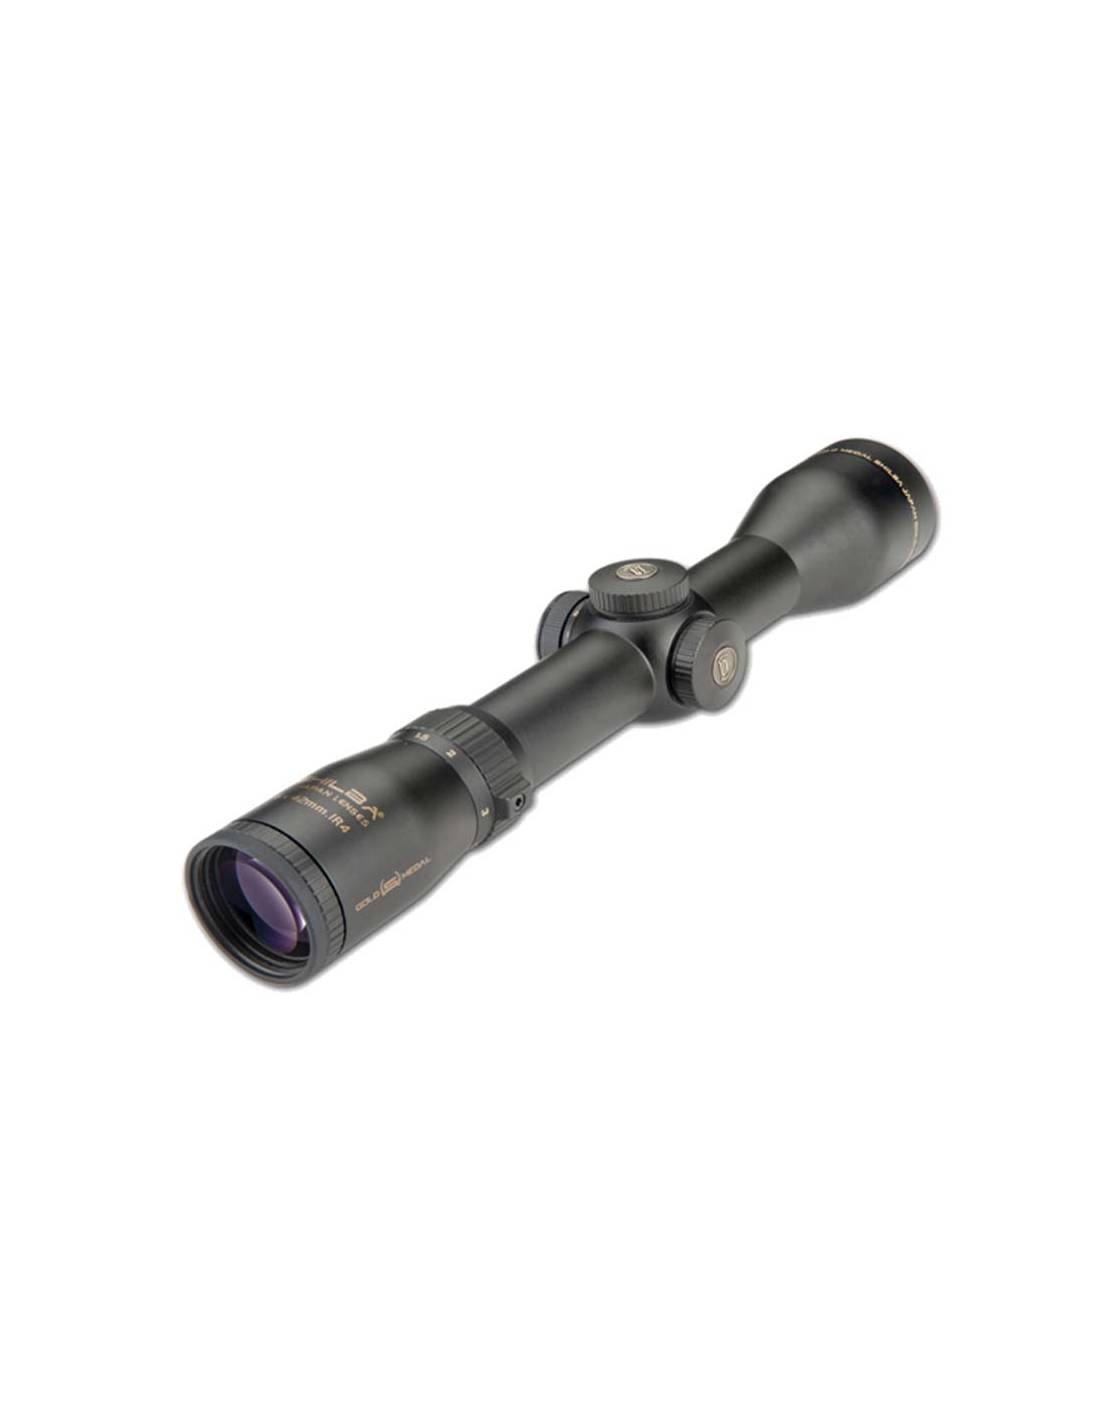 Gold Medal Hunting Scope with Illuminated Reticle